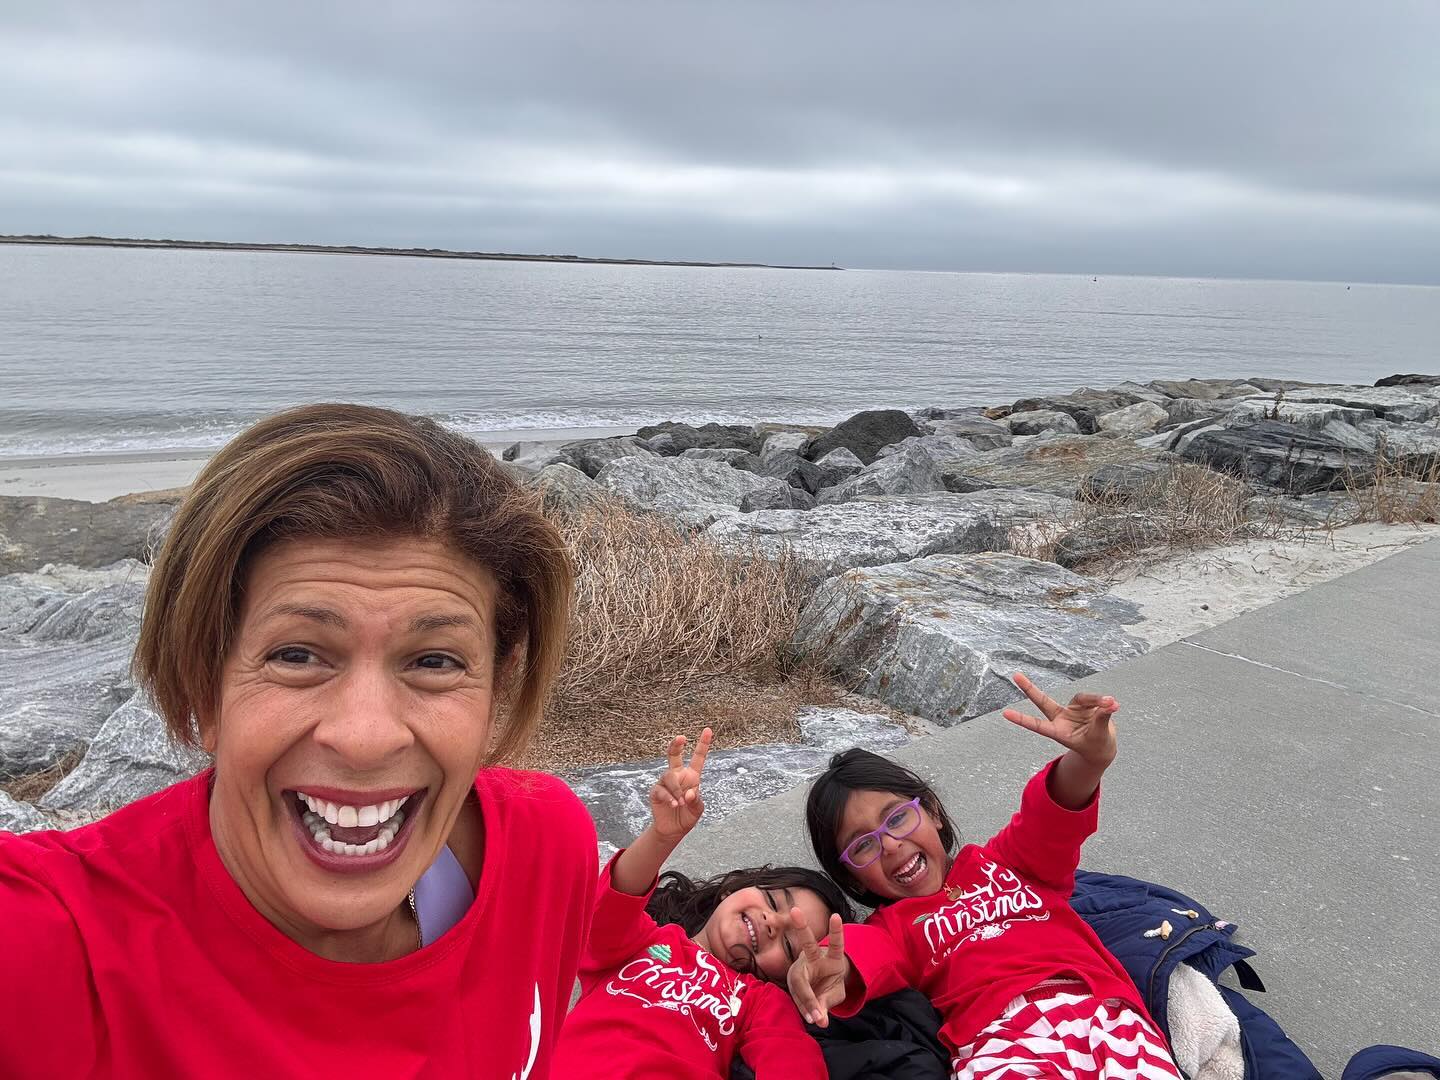 Hoda shared a photo of her, Hope, and Haley smiling at an exotic beach